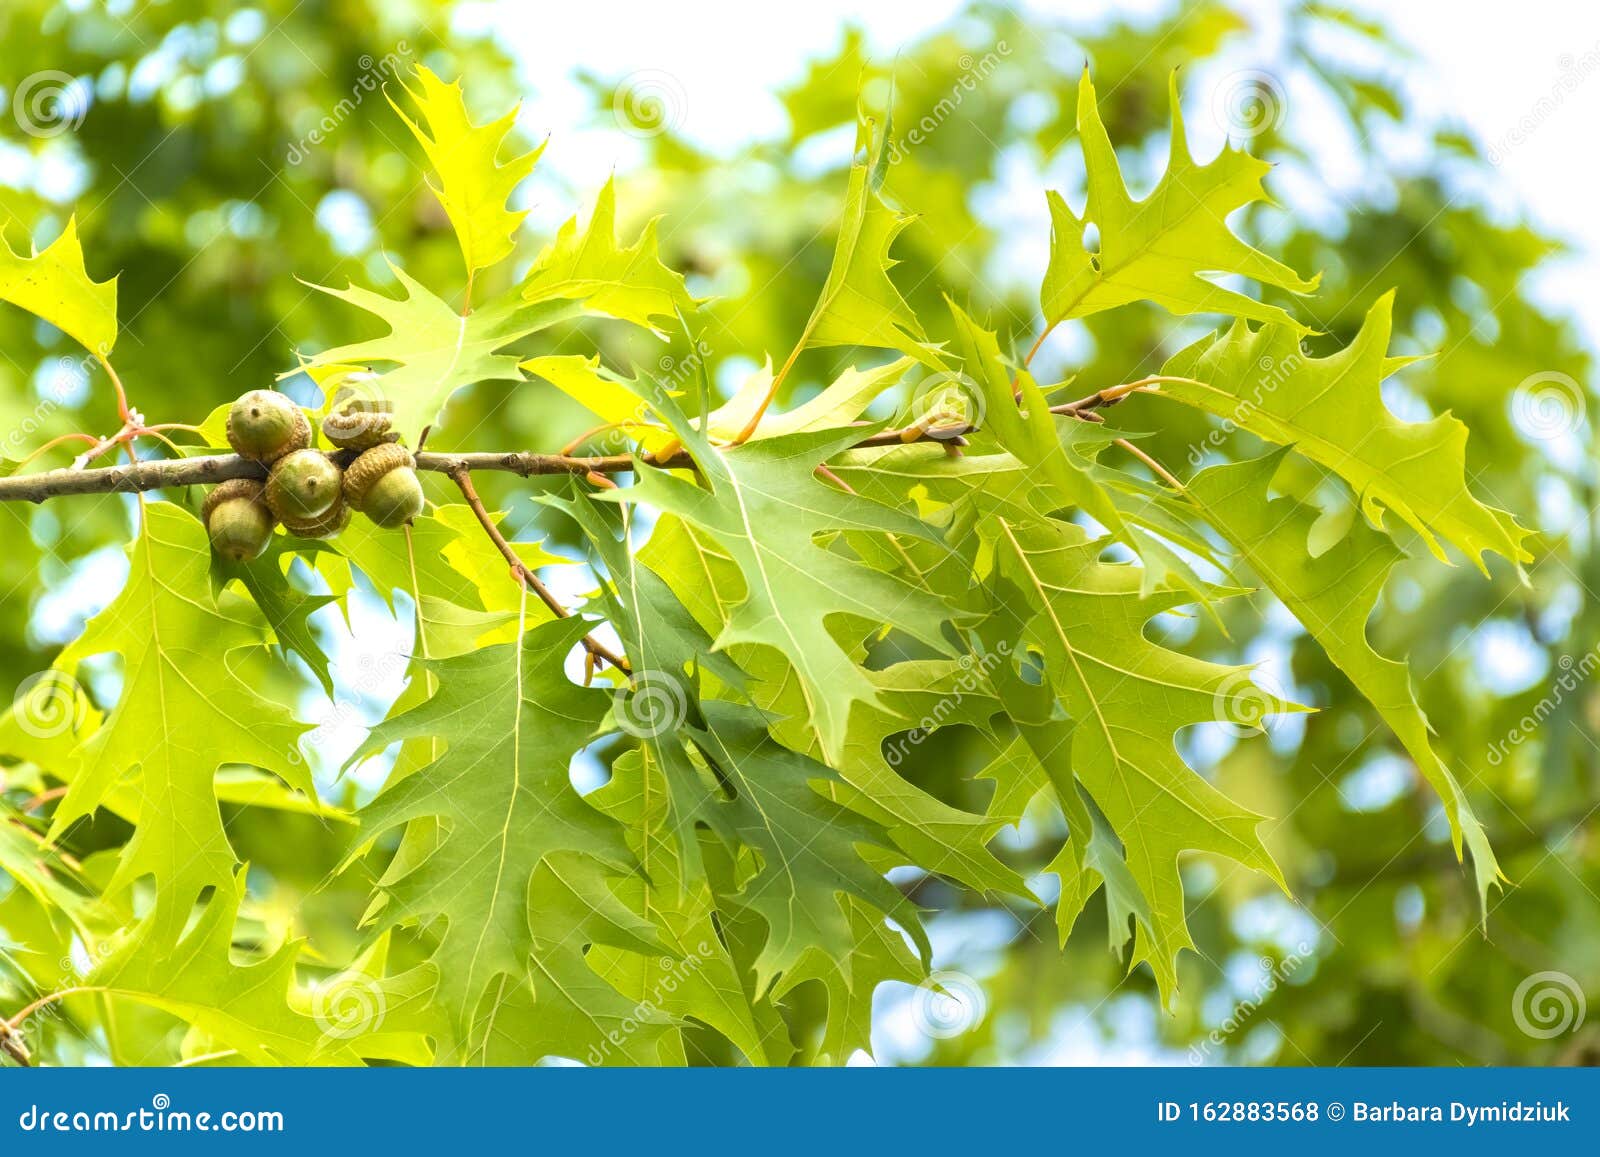 quercus rubra l., red oak in summer on the sky background; leafy background